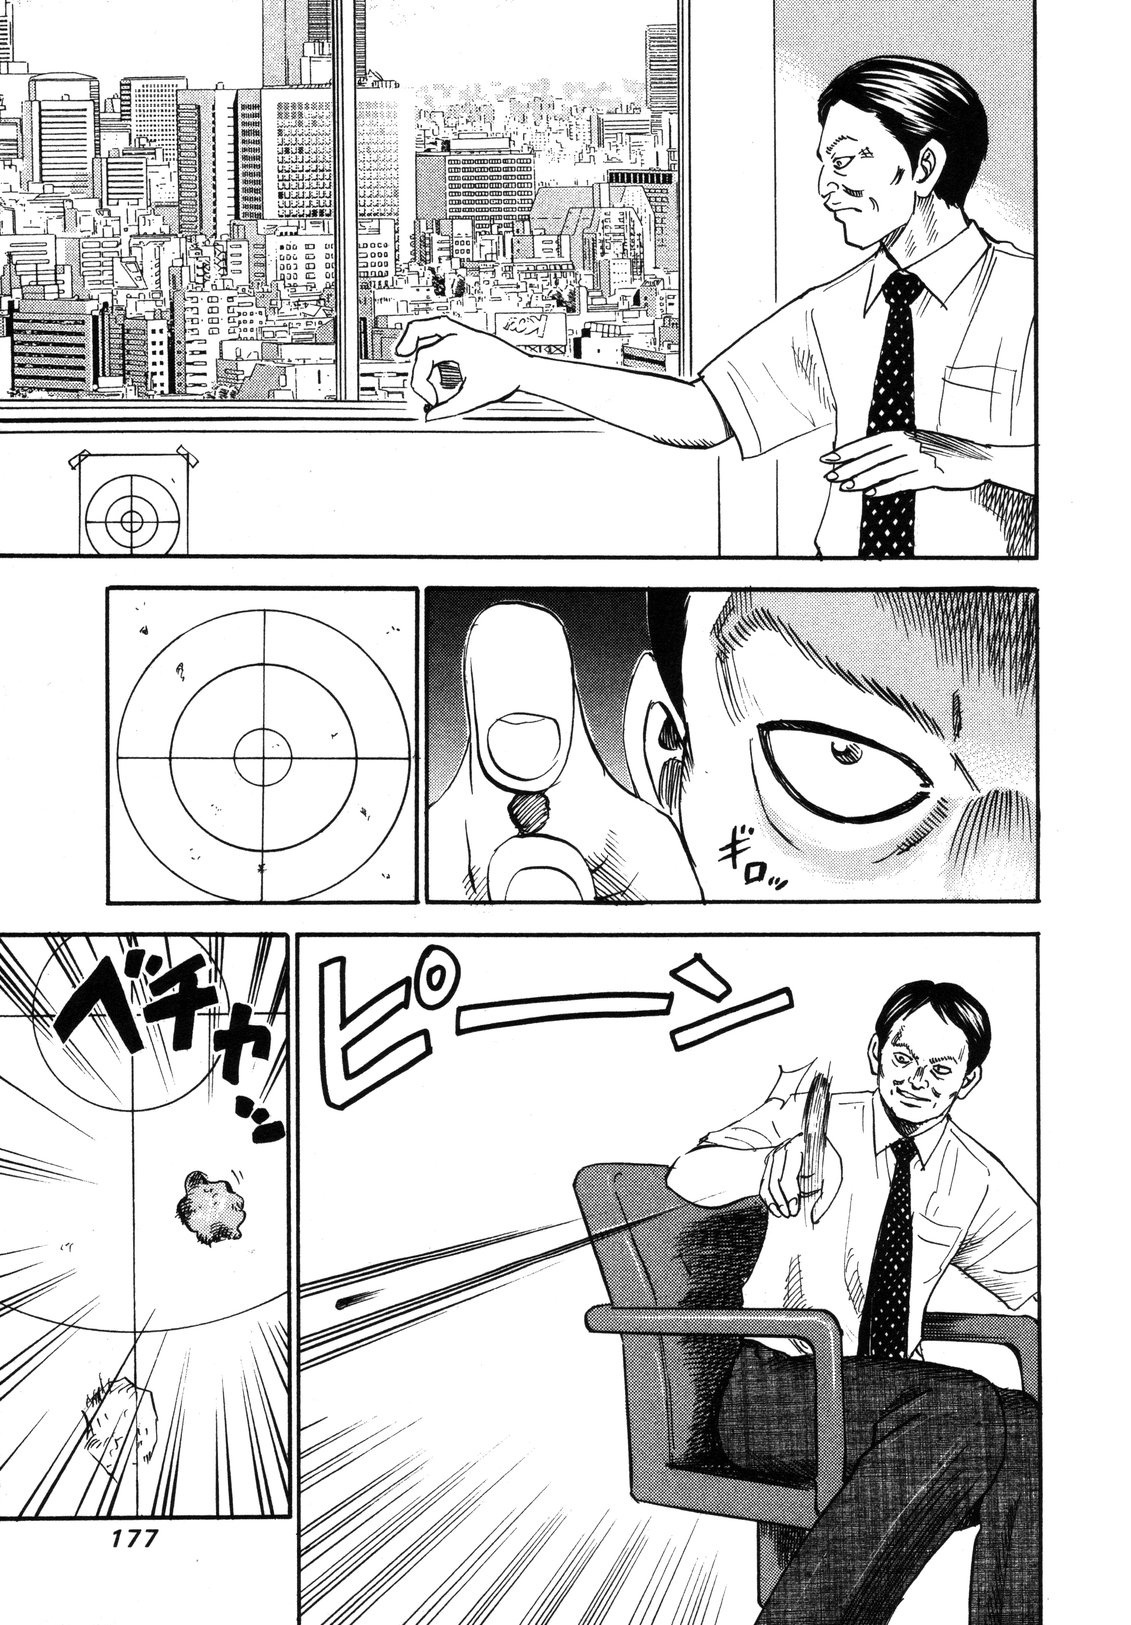 Uramiya Honpo Vol.12 Chapter 84: Boss That Doesn't Work 2 - Picture 3